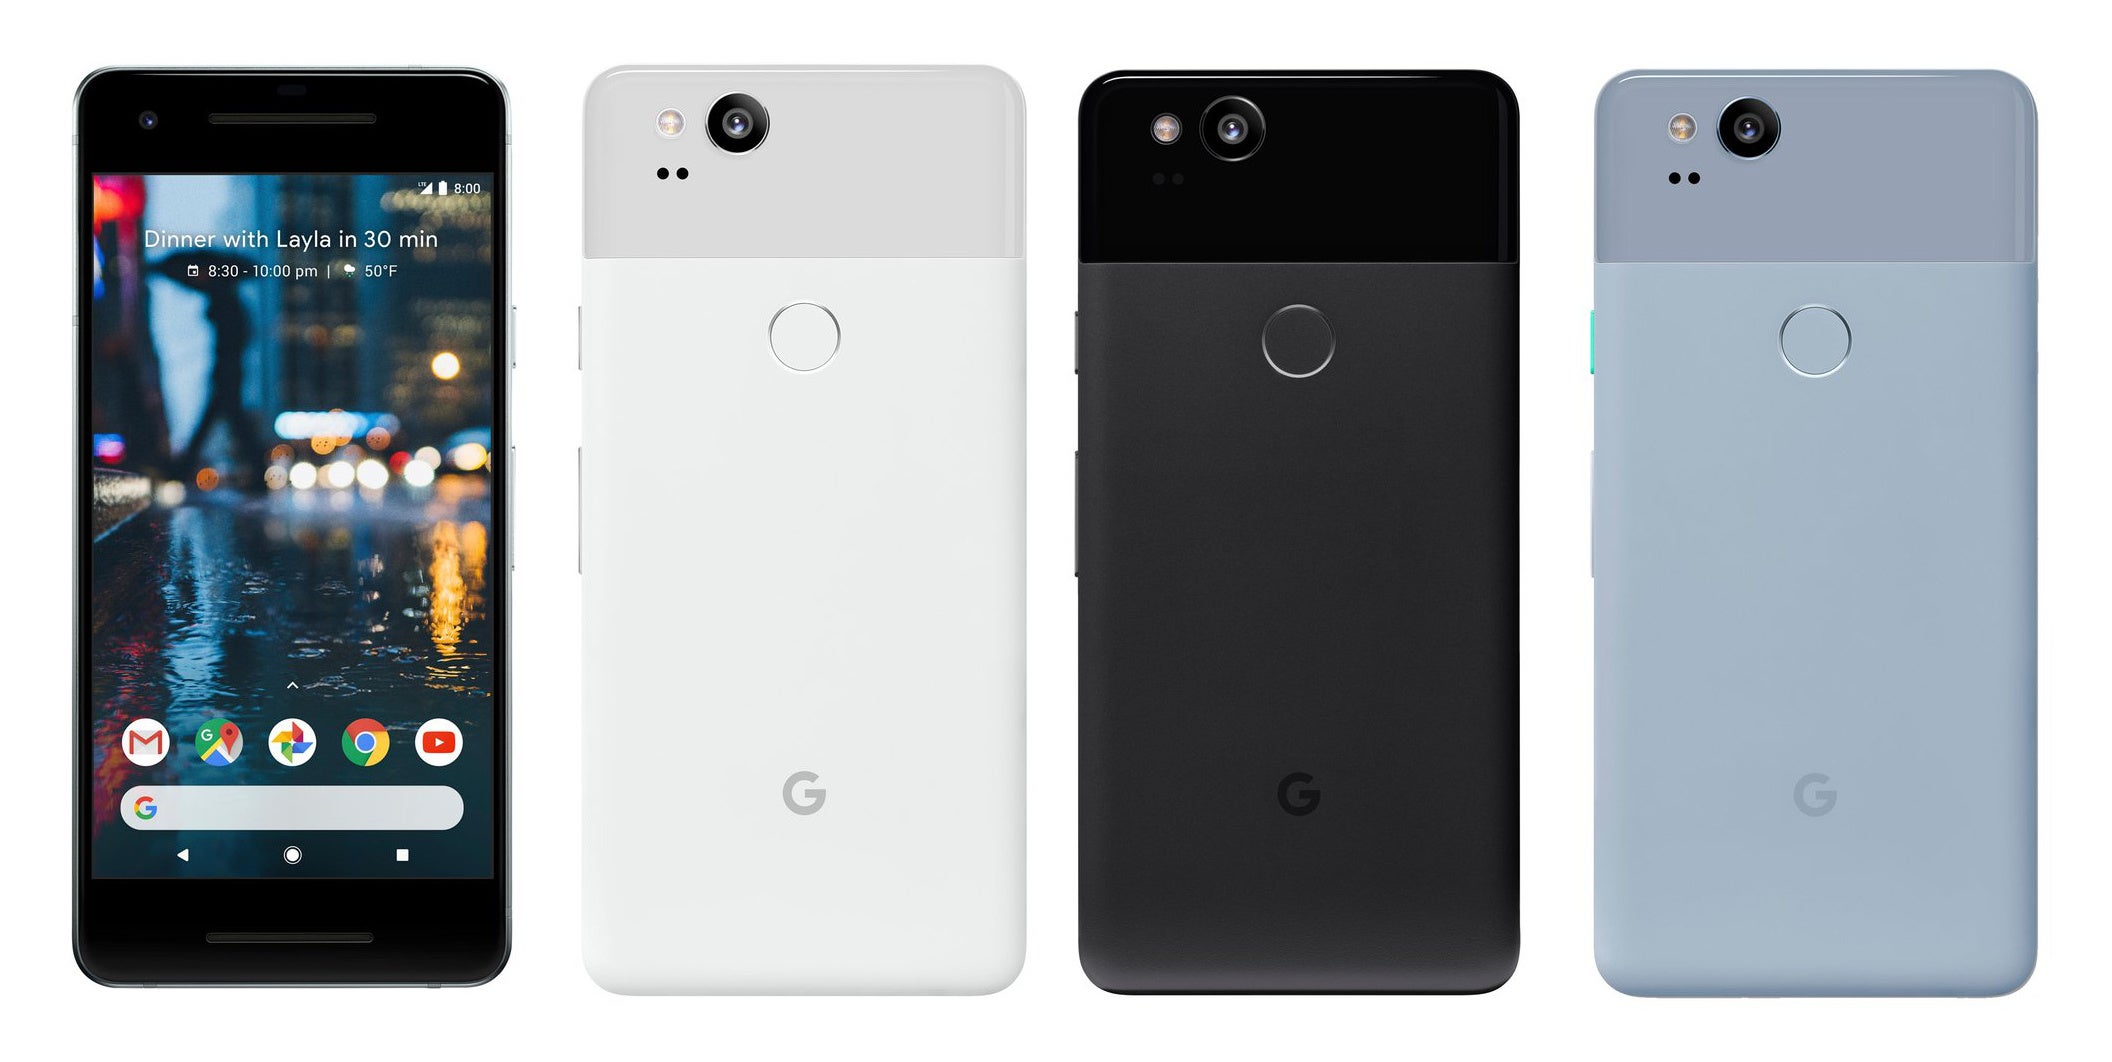 Google Pixel 2 in Clearly White, Just Black, and Kinda Blue - Google Pixel 2 goes official: Android Oreo showcase and possibly the best camera on a phone